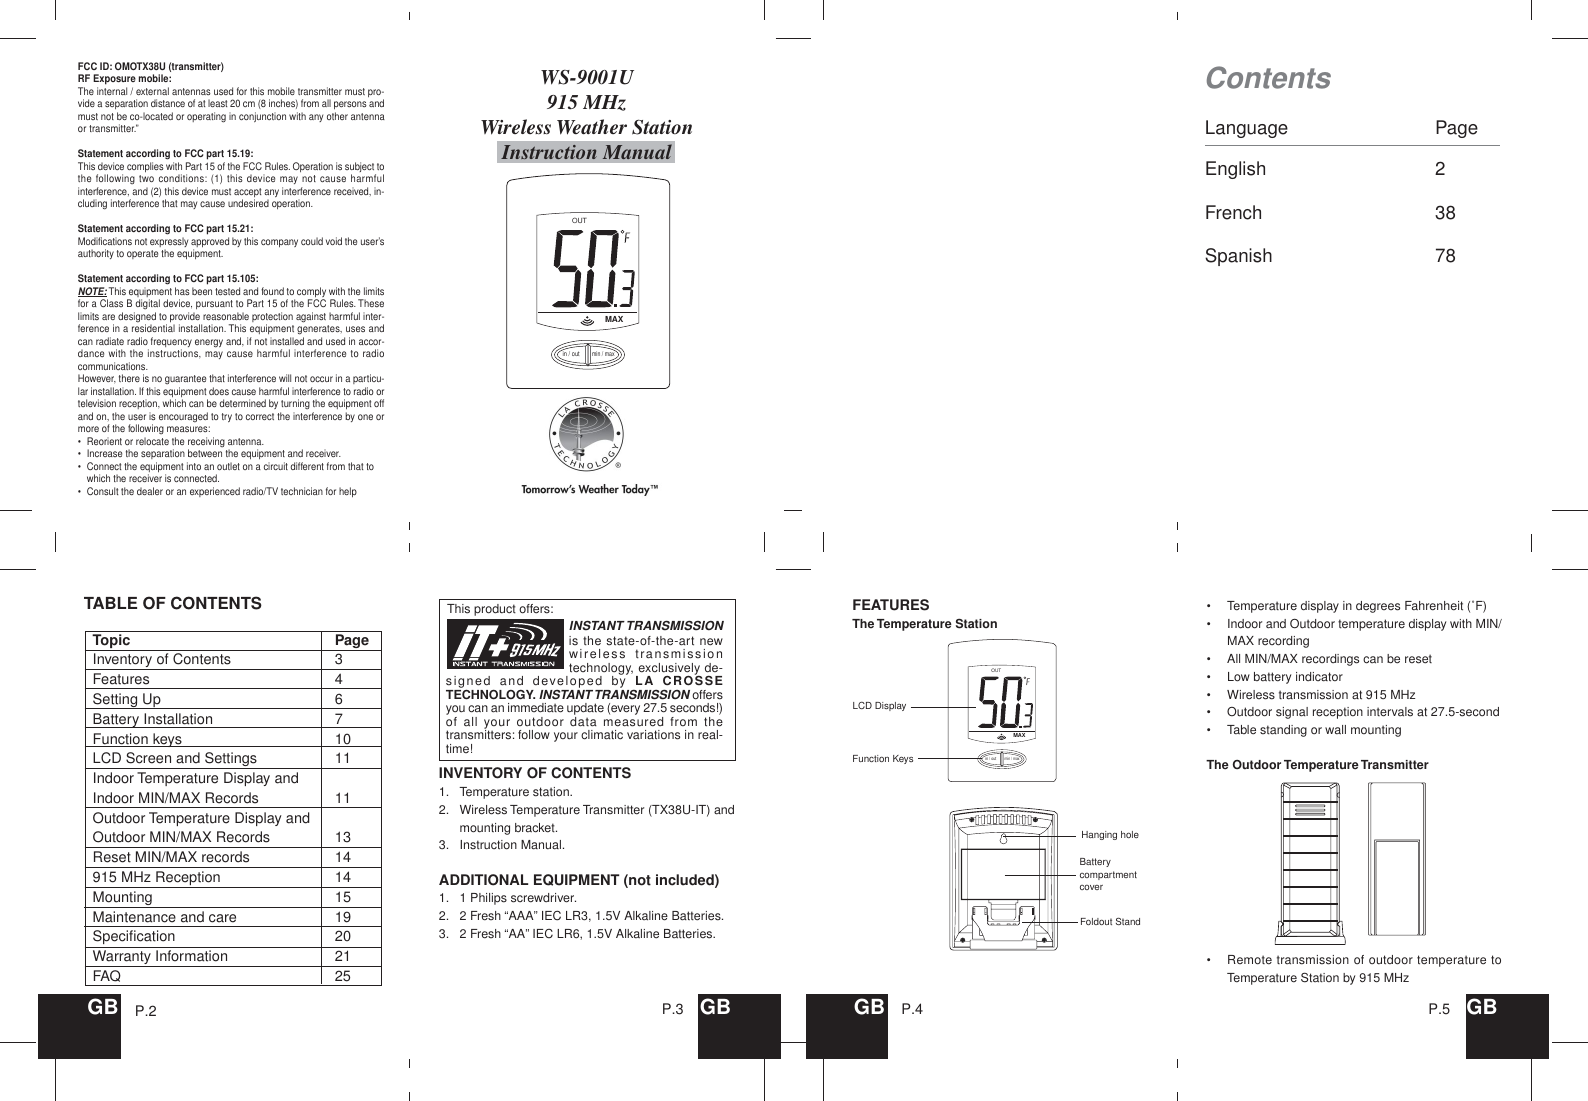 OUTMAXin / outmin / maxLanguage PageEnglish 2French 38Spanish 78This product offers:WS-9001U915 MHzWireless Weather StationInstruction ManualContentsGB GBP.3 GB P.4 GBP.5INSTANT TRANSMISSIONis the state-of-the-art newwireless transmissiontechnology, exclusively de-signed and developed by LA CROSSETECHNOLOGY. INSTANT TRANSMISSION offersyou can an immediate update (every 27.5 seconds!)of all your outdoor data measured from thetransmitters: follow your climatic variations in real-time!P.2FCC ID: OMOTX38U (transmitter)RF Exposure mobile:The internal / external antennas used for this mobile transmitter must pro-vide a separation distance of at least 20 cm (8 inches) from all persons andmust not be co-located or operating in conjunction with any other antennaor transmitter.”Statement according to FCC part 15.19:This device complies with Part 15 of the FCC Rules. Operation is subject tothe following two conditions: (1) this device may not cause harmfulinterference, and (2) this device must accept any interference received, in-cluding interference that may cause undesired operation.Statement according to FCC part 15.21:Modifications not expressly approved by this company could void the user’sauthority to operate the equipment.Statement according to FCC part 15.105:NOTE: This equipment has been tested and found to comply with the limitsfor a Class B digital device, pursuant to Part 15 of the FCC Rules. Theselimits are designed to provide reasonable protection against harmful inter-ference in a residential installation. This equipment generates, uses andcan radiate radio frequency energy and, if not installed and used in accor-dance with the instructions, may cause harmful interference to radiocommunications.However, there is no guarantee that interference will not occur in a particu-lar installation. If this equipment does cause harmful interference to radio ortelevision reception, which can be determined by turning the equipment offand on, the user is encouraged to try to correct the interference by one ormore of the following measures:•Reorient or relocate the receiving antenna.•Increase the separation between the equipment and receiver.•Connect the equipment into an outlet on a circuit different from that towhich the receiver is connected.•Consult the dealer or an experienced radio/TV technician for helpINVENTORY OF CONTENTS1. Temperature station.2. Wireless Temperature Transmitter (TX38U-IT) andmounting bracket.3. Instruction Manual.ADDITIONAL EQUIPMENT (not included)1. 1 Philips screwdriver.2. 2 Fresh “AAA” IEC LR3, 1.5V Alkaline Batteries.3. 2 Fresh “AA” IEC LR6, 1.5V Alkaline Batteries.TABLE OF CONTENTSTopic PageInventory of Contents 3Features 4Setting Up 6Battery Installation 7Function keys 10LCD Screen and Settings 11Indoor Temperature Display andIndoor MIN/MAX Records 11Outdoor Temperature Display andOutdoor MIN/MAX Records 13Reset MIN/MAX records 14915 MHz Reception 14Mounting 15Maintenance and care 19Specification 20Warranty Information 21FAQ 25FEATURESThe Temperature StationOUTMAXin / outmin / max•Temperature display in degrees Fahrenheit (˚F)•Indoor and Outdoor temperature display with MIN/MAX recording•All MIN/MAX recordings can be reset•Low battery indicator•Wireless transmission at 915 MHz•Outdoor signal reception intervals at 27.5-second•Table standing or wall mountingThe Outdoor Temperature Transmitter•Remote transmission of outdoor temperature toTemperature Station by 915 MHzLCD DisplayFunction KeysHanging holeBatterycompartmentcoverFoldout Stand